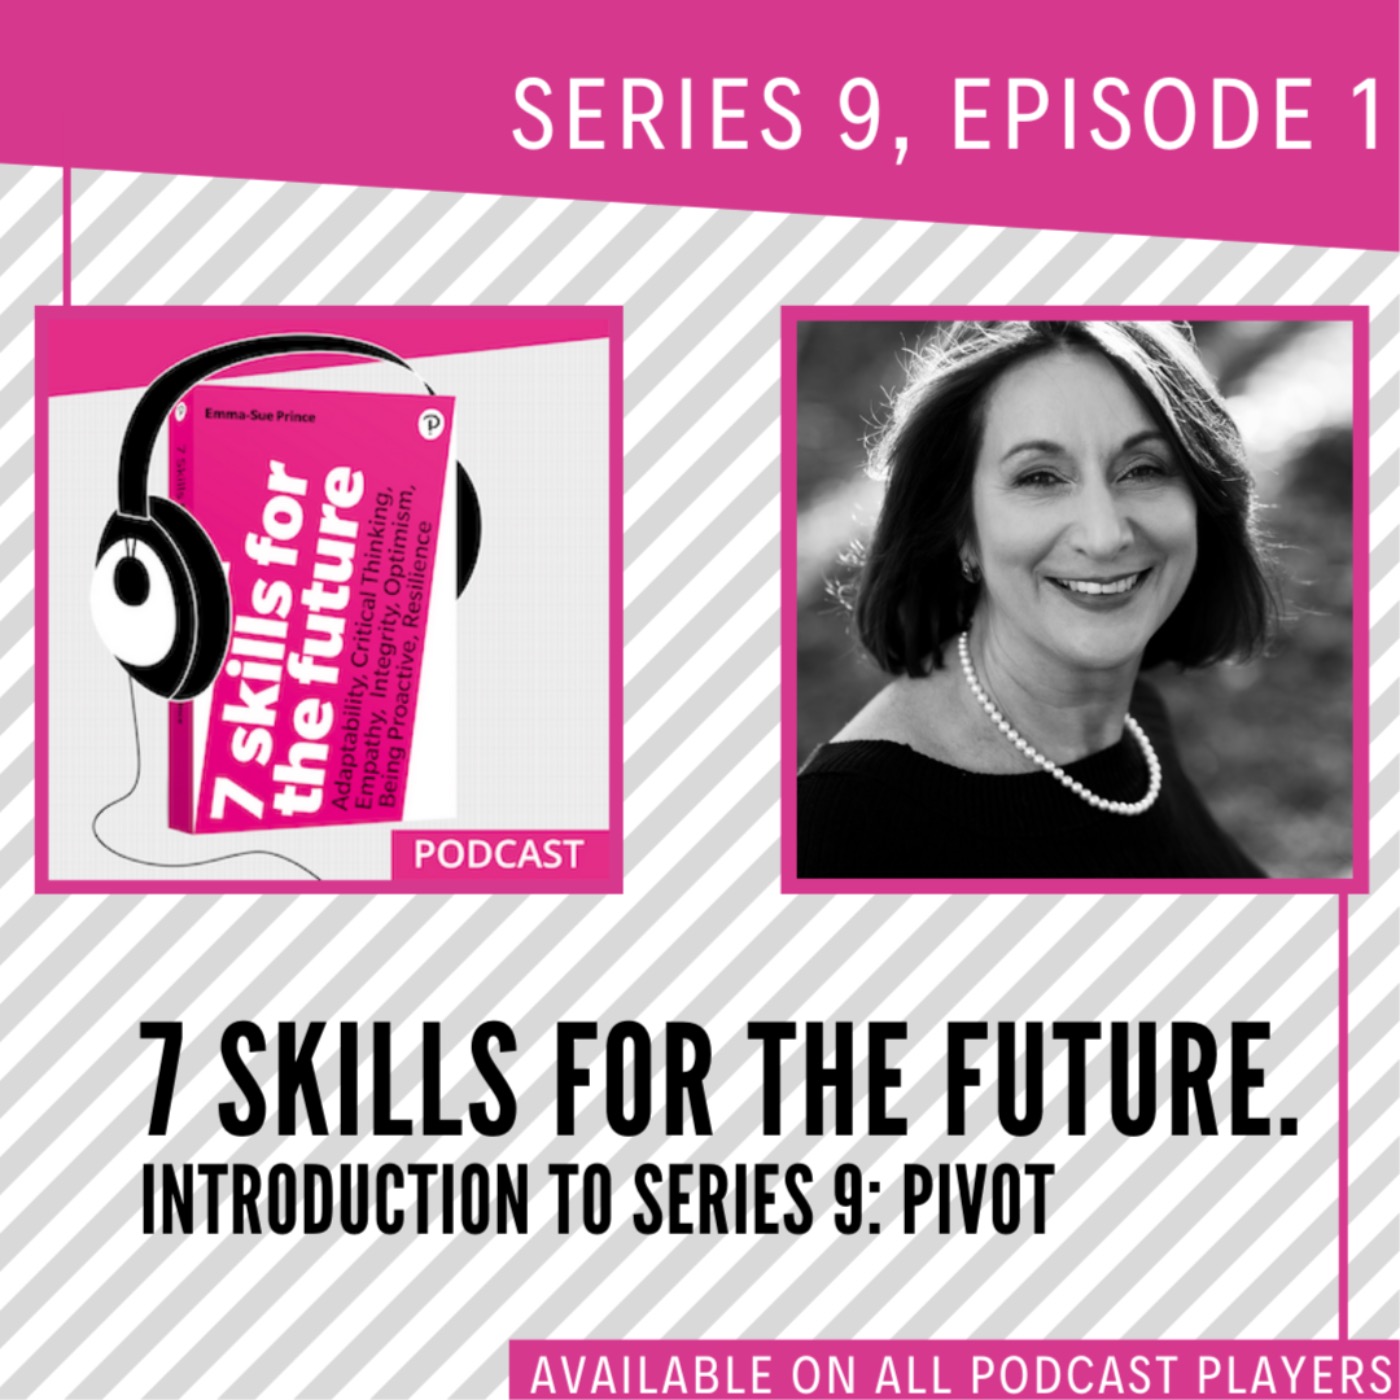 Introduction to Series 9: Pivot